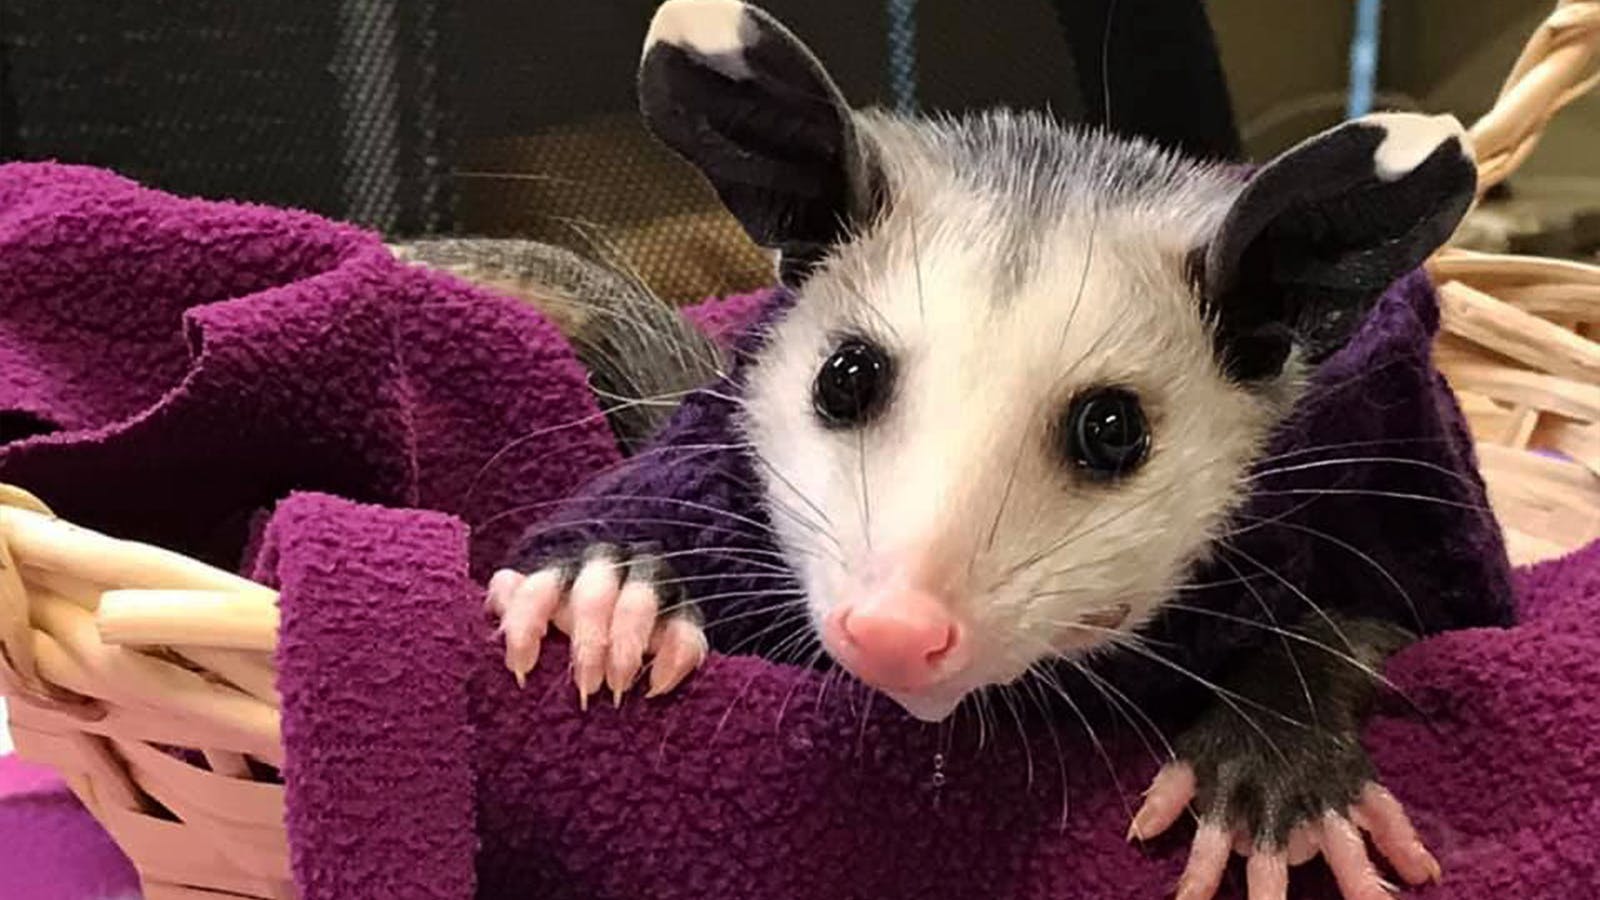 The cutest of cute possums.